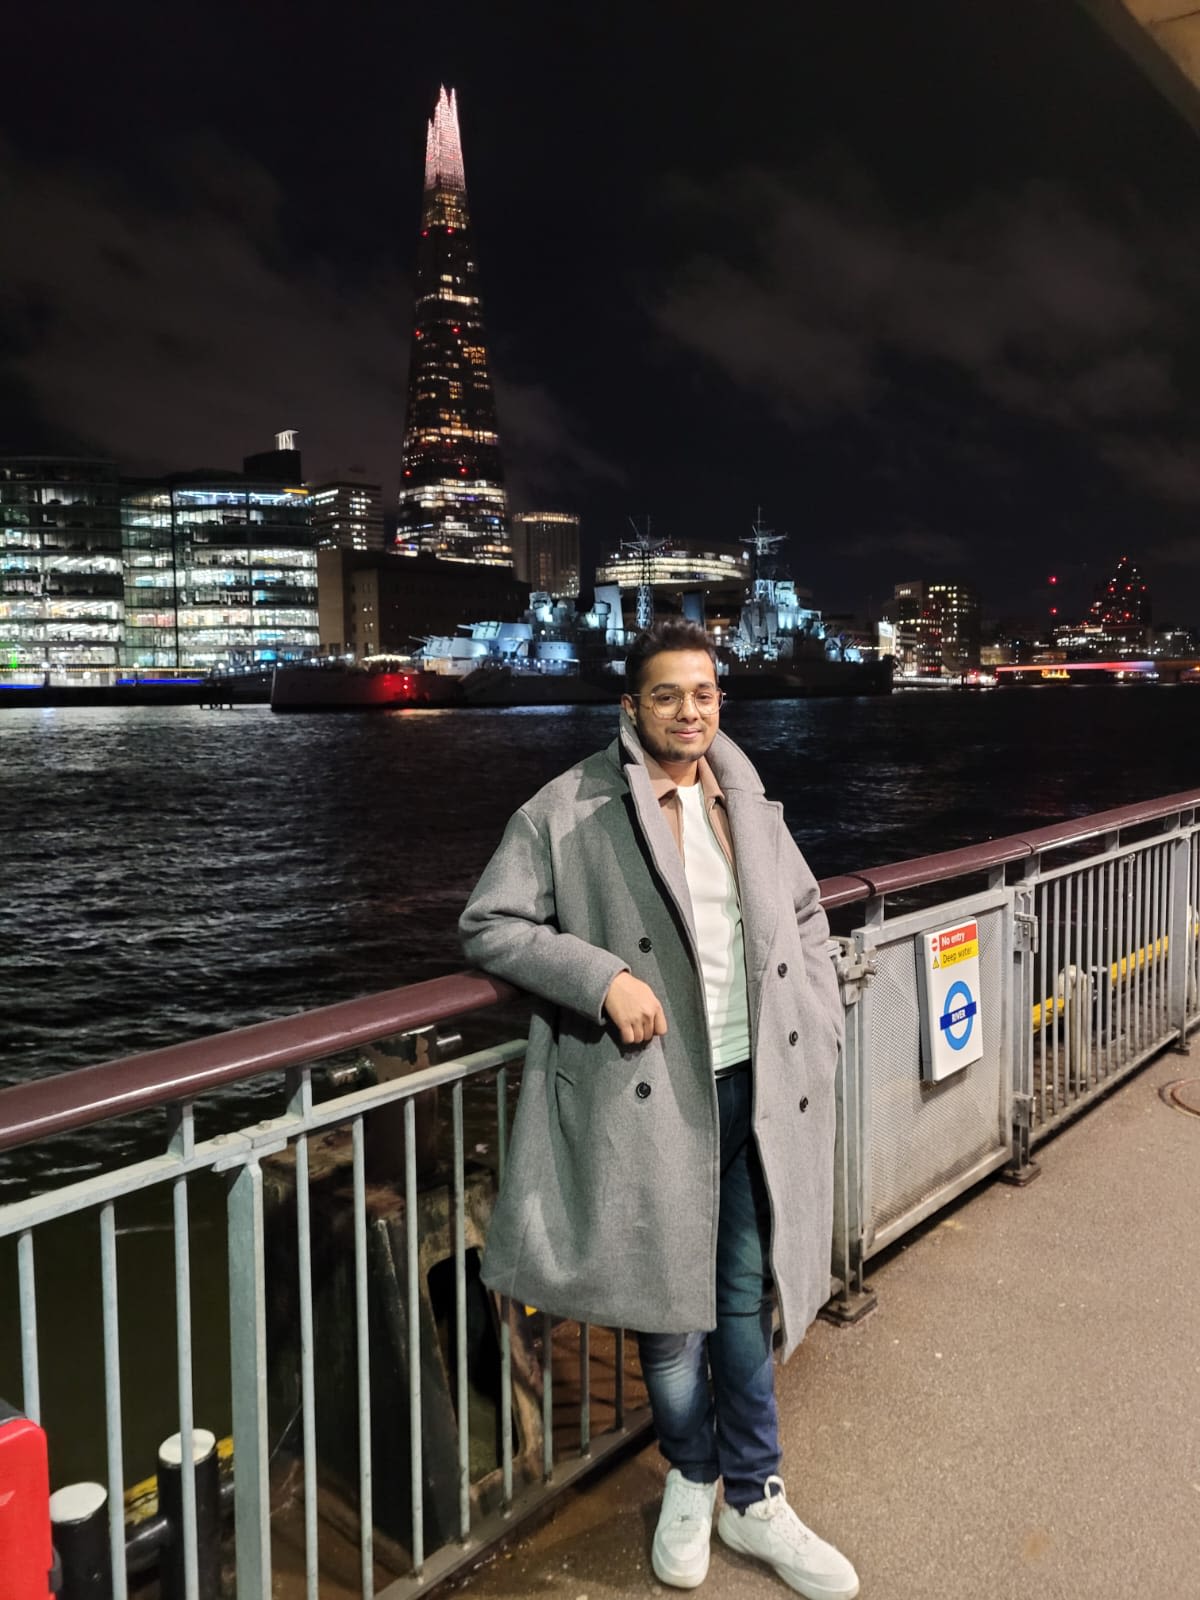 Image of Rishant with London in the background